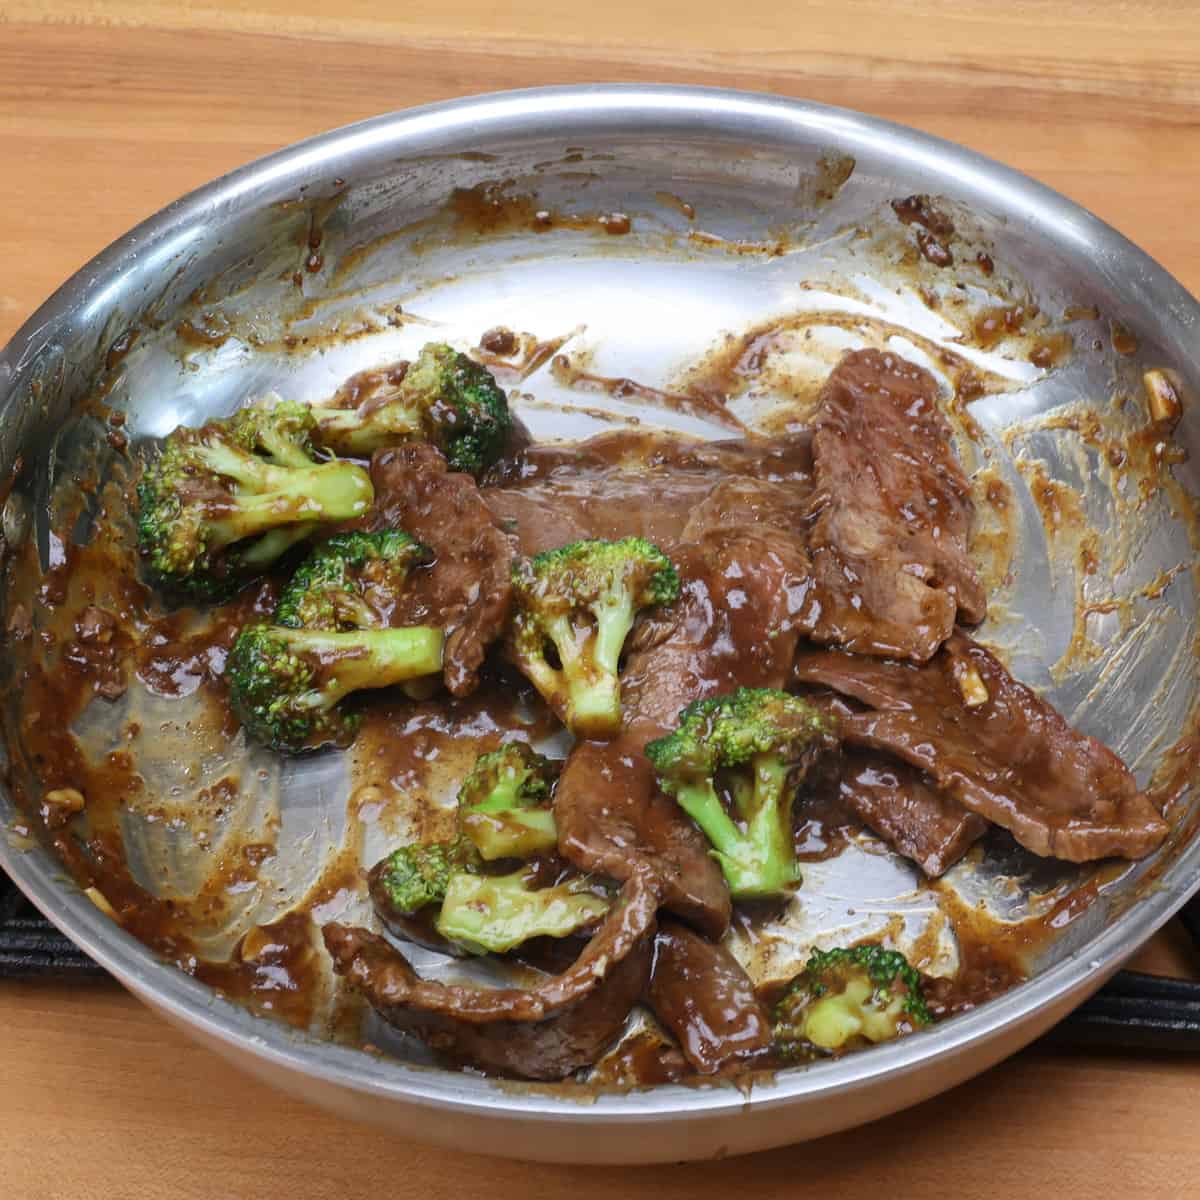 beef and broccoli simmering in a stir fry sauce.